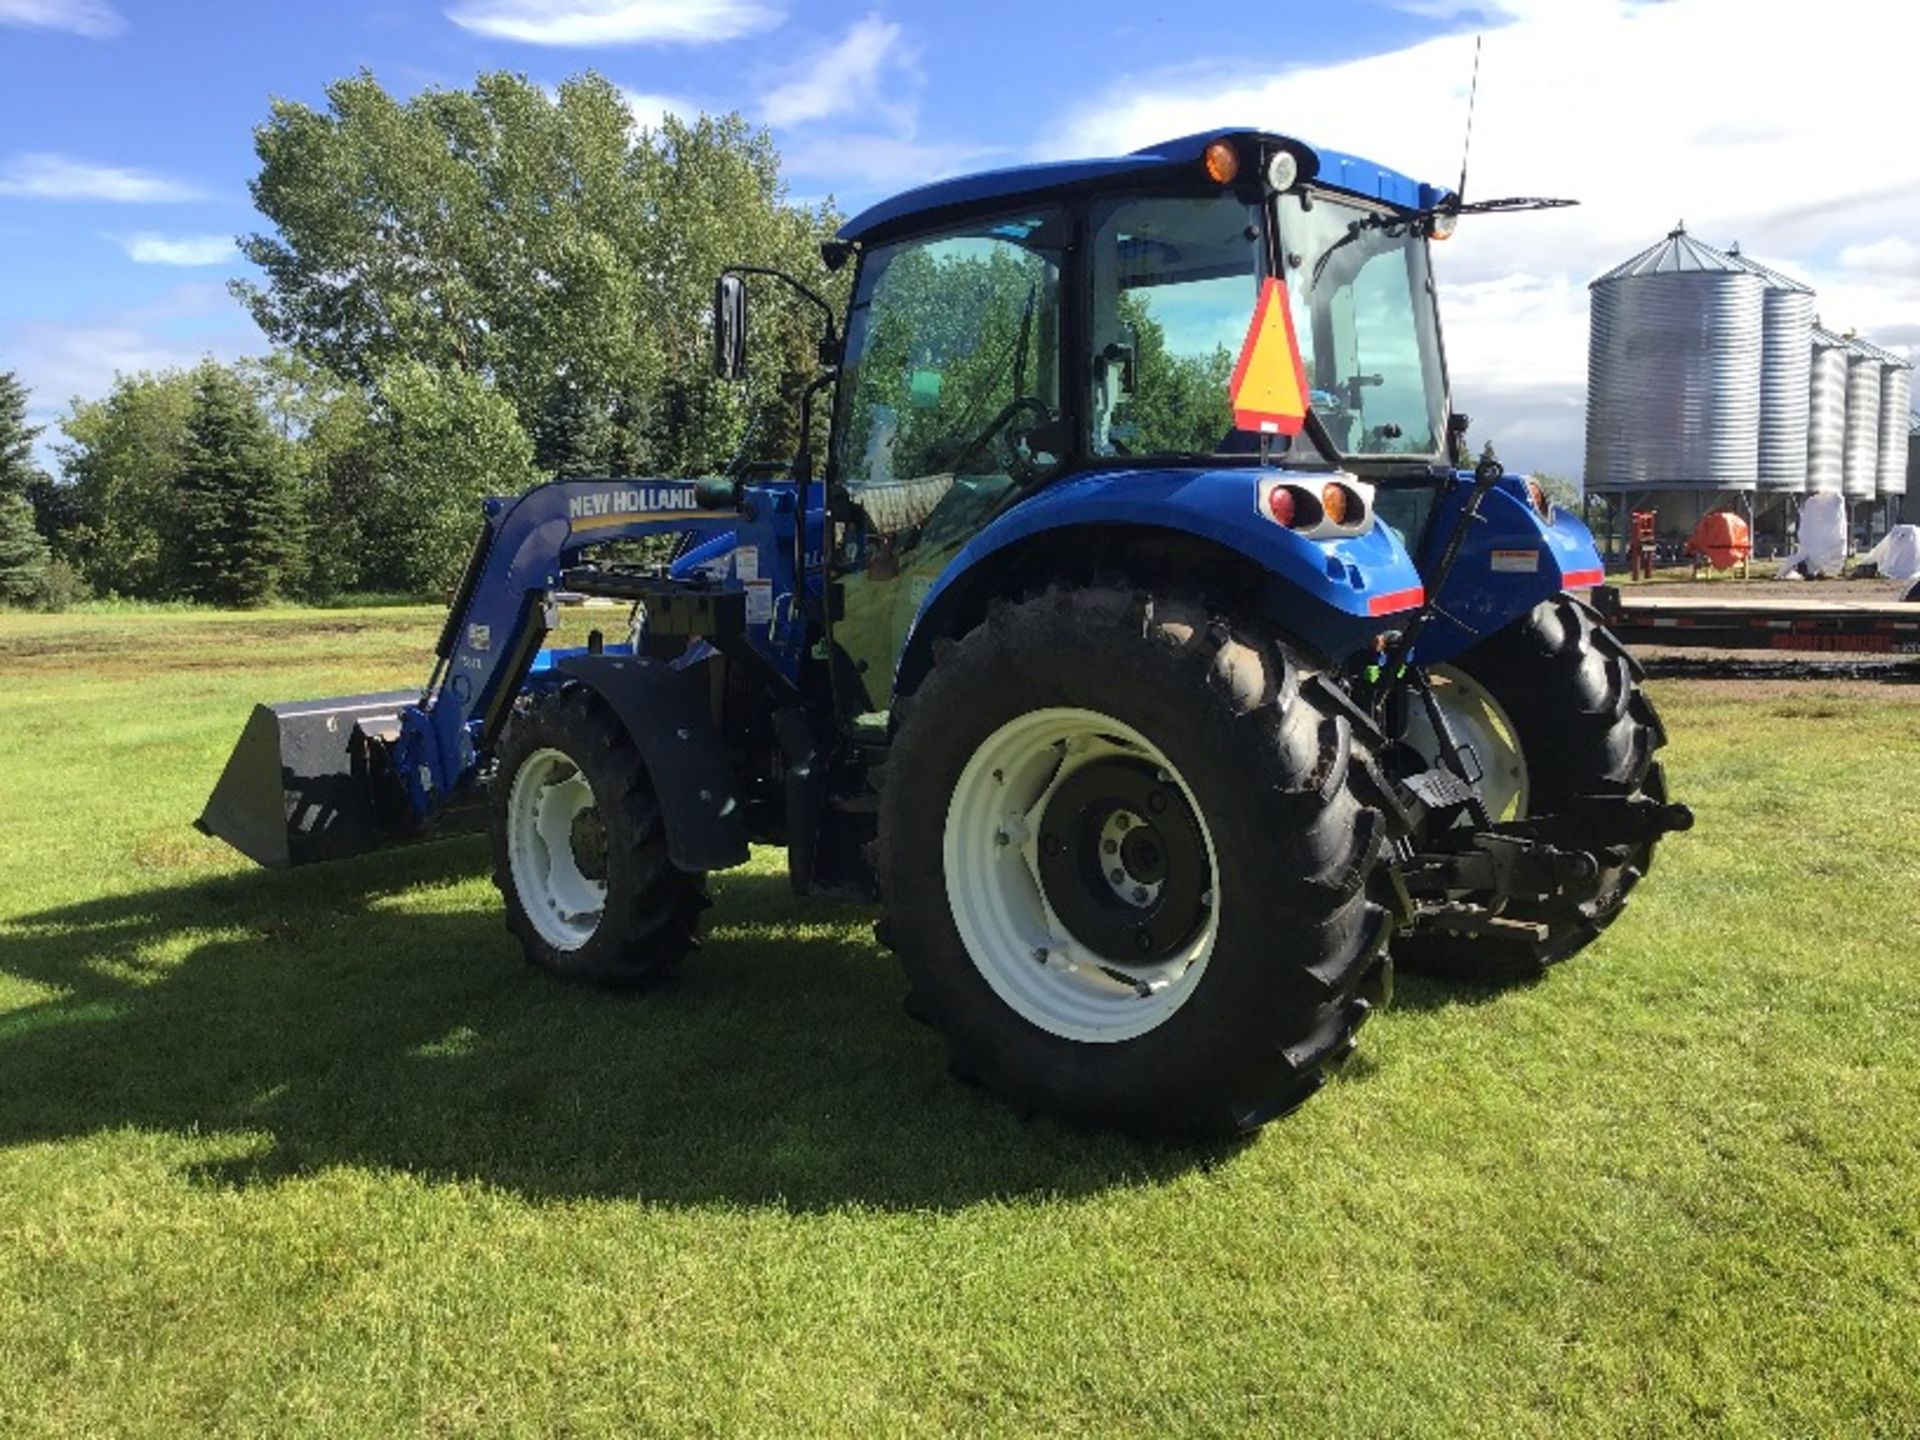 2014 New Holland T4.75 Powerstar MFWD Tractor s/n ZEAH02081 363hrs, 75hp, 540PTO, 3pt, (3)- Rear - Image 3 of 14